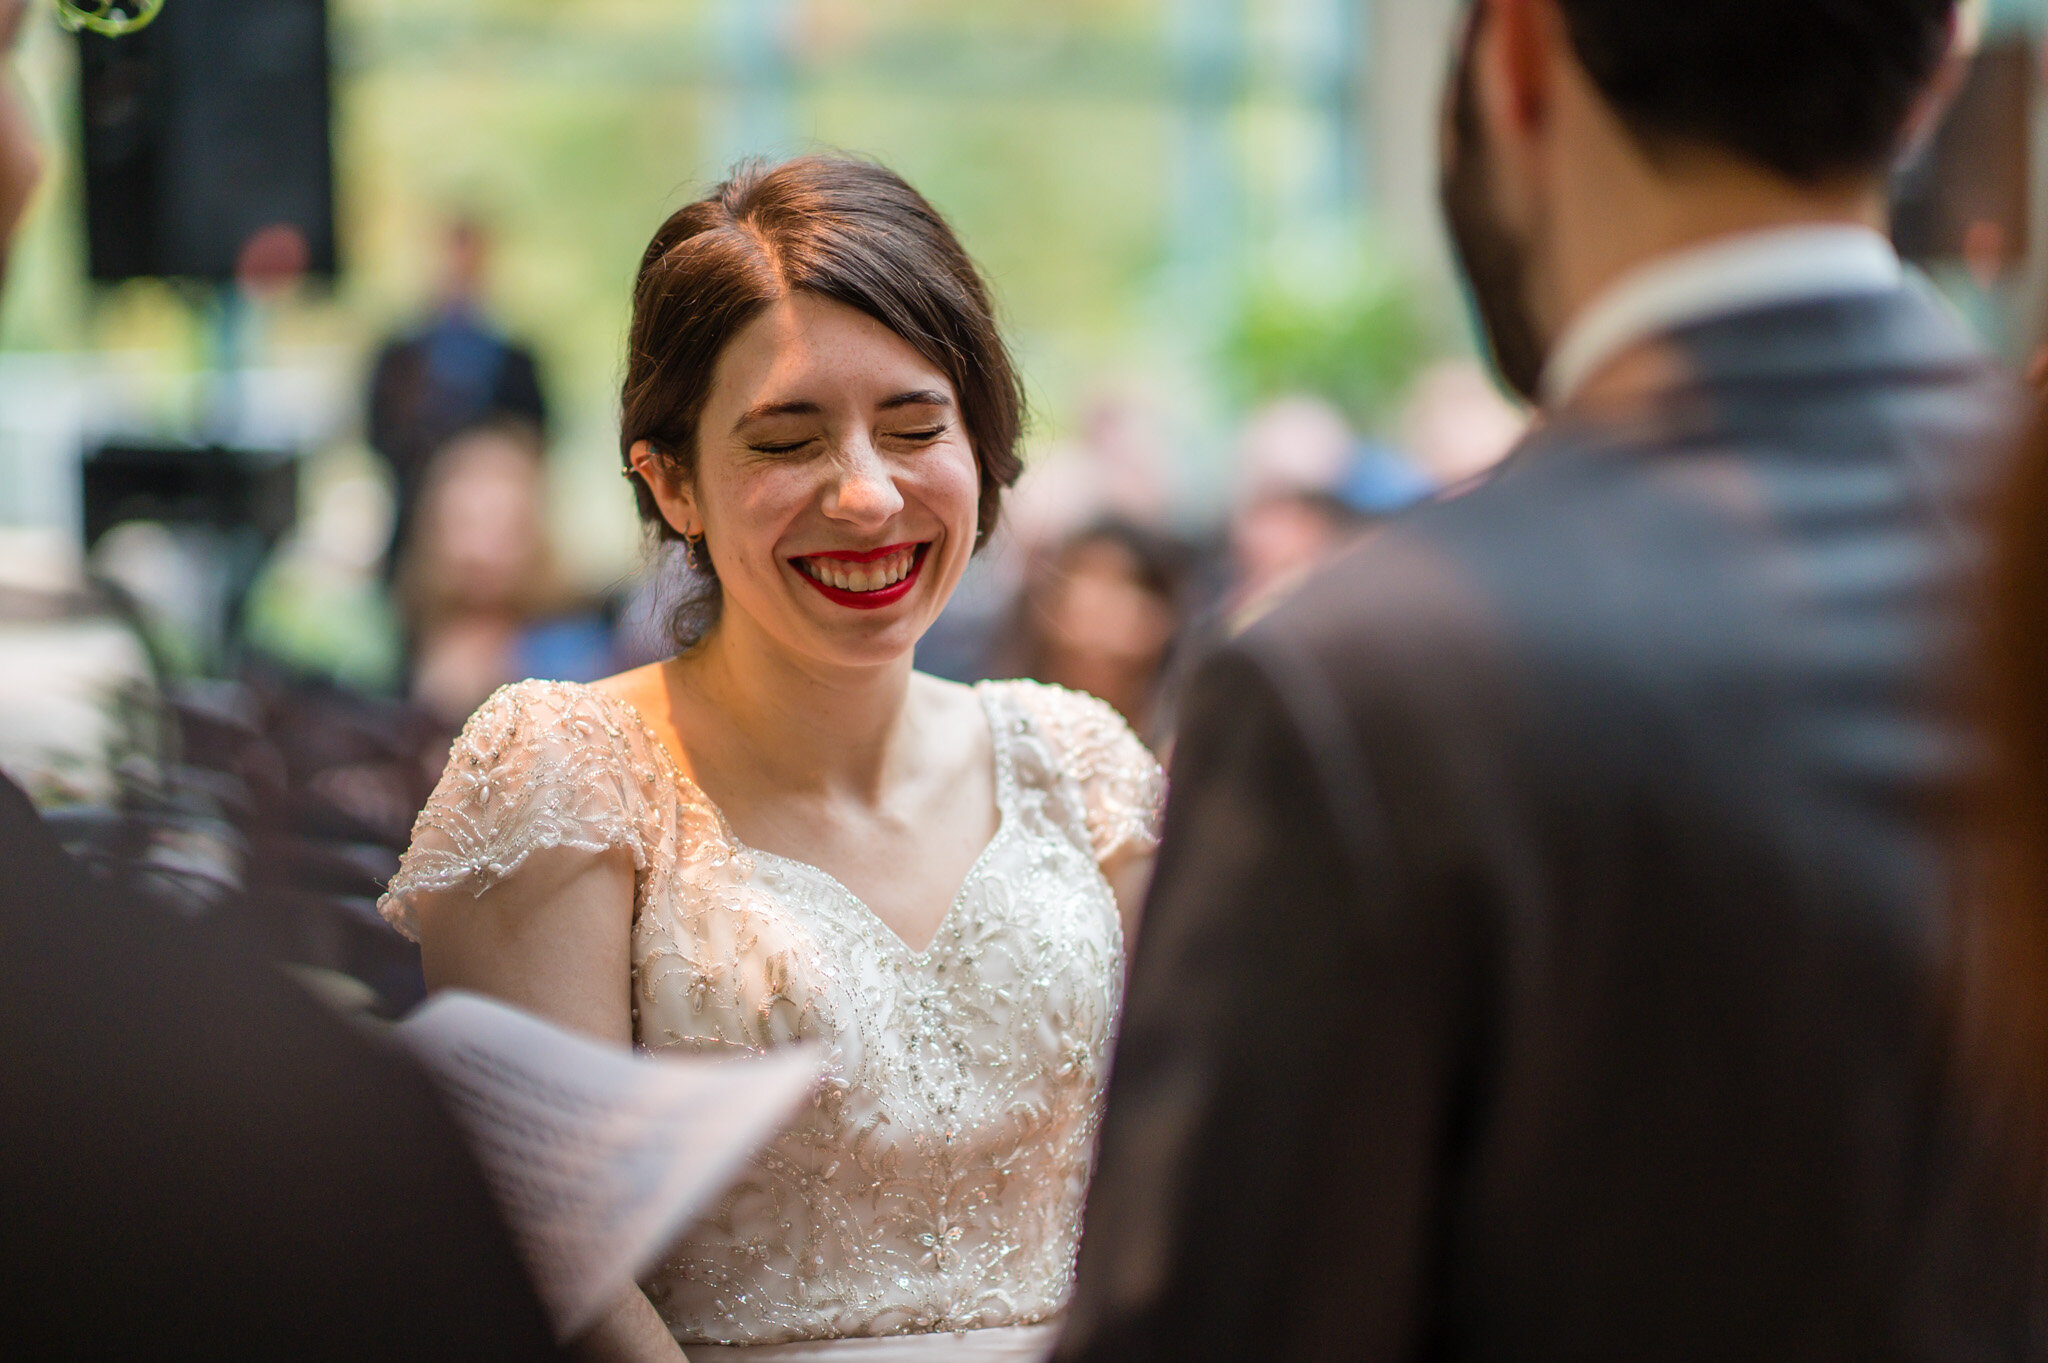 The bride and groom share a laugh at their jewish wedding ceremony